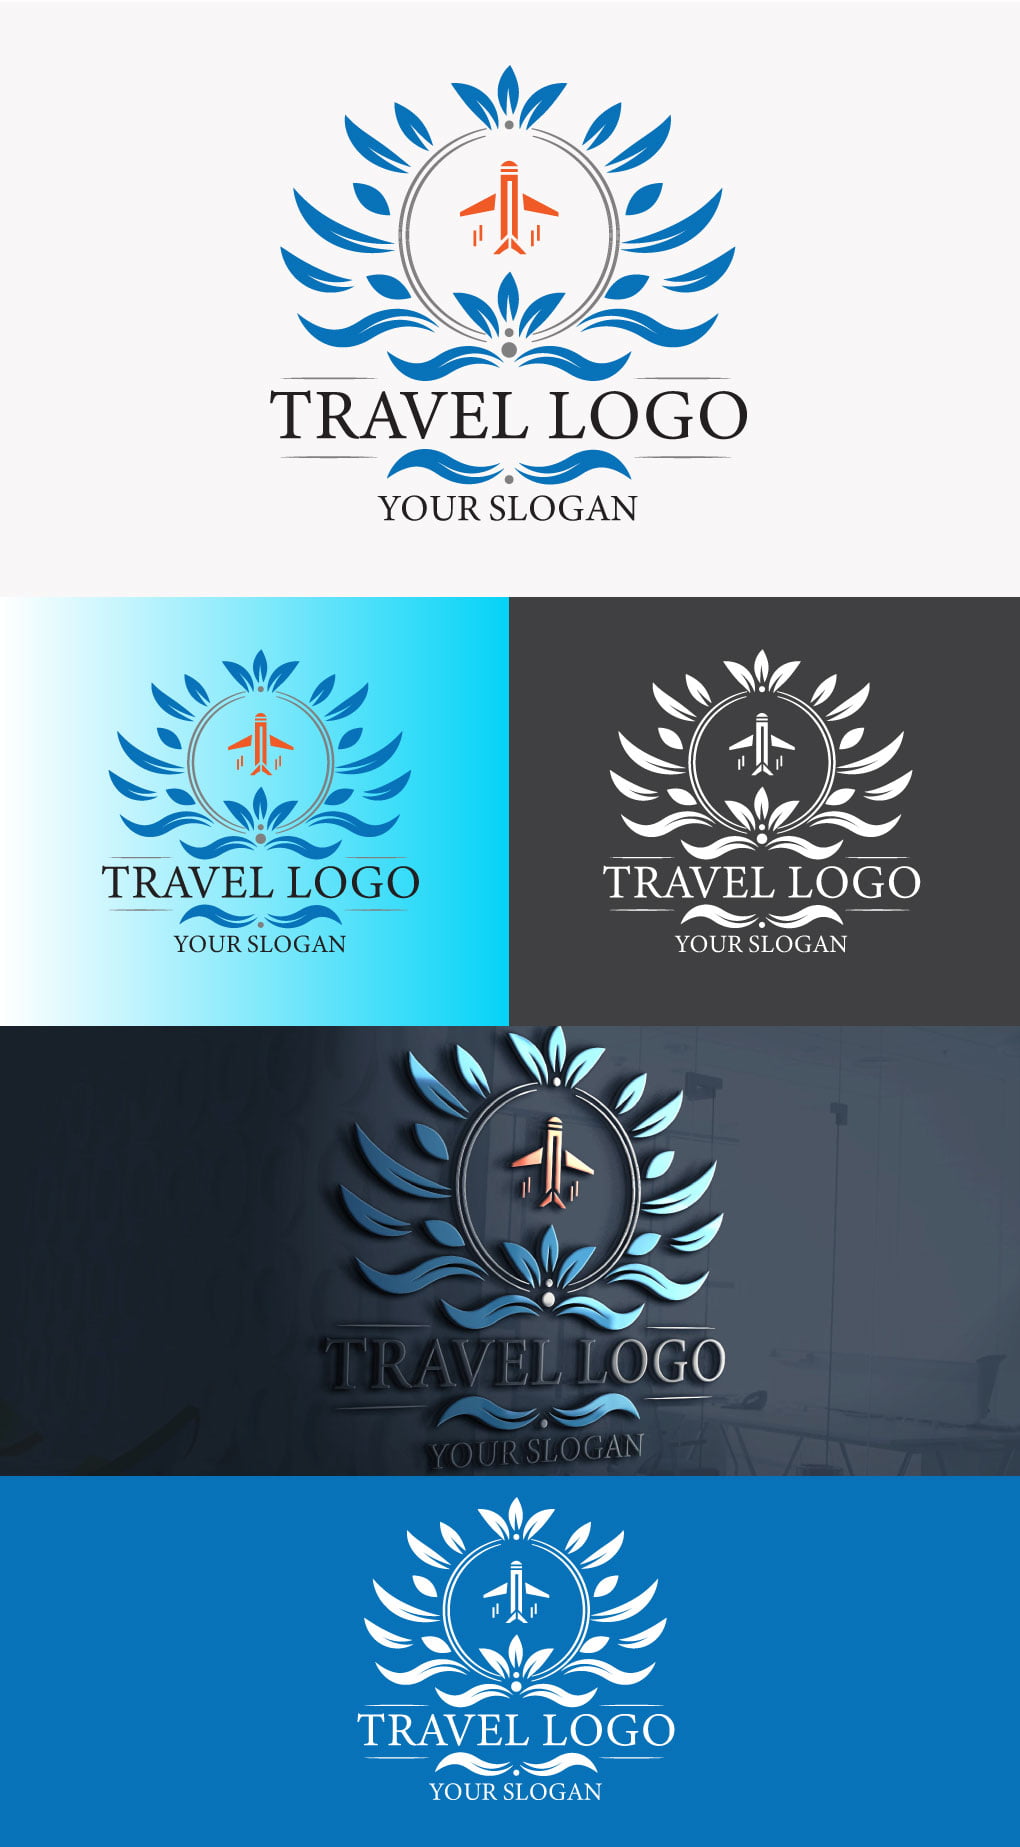 Tour And Travels Logo Design